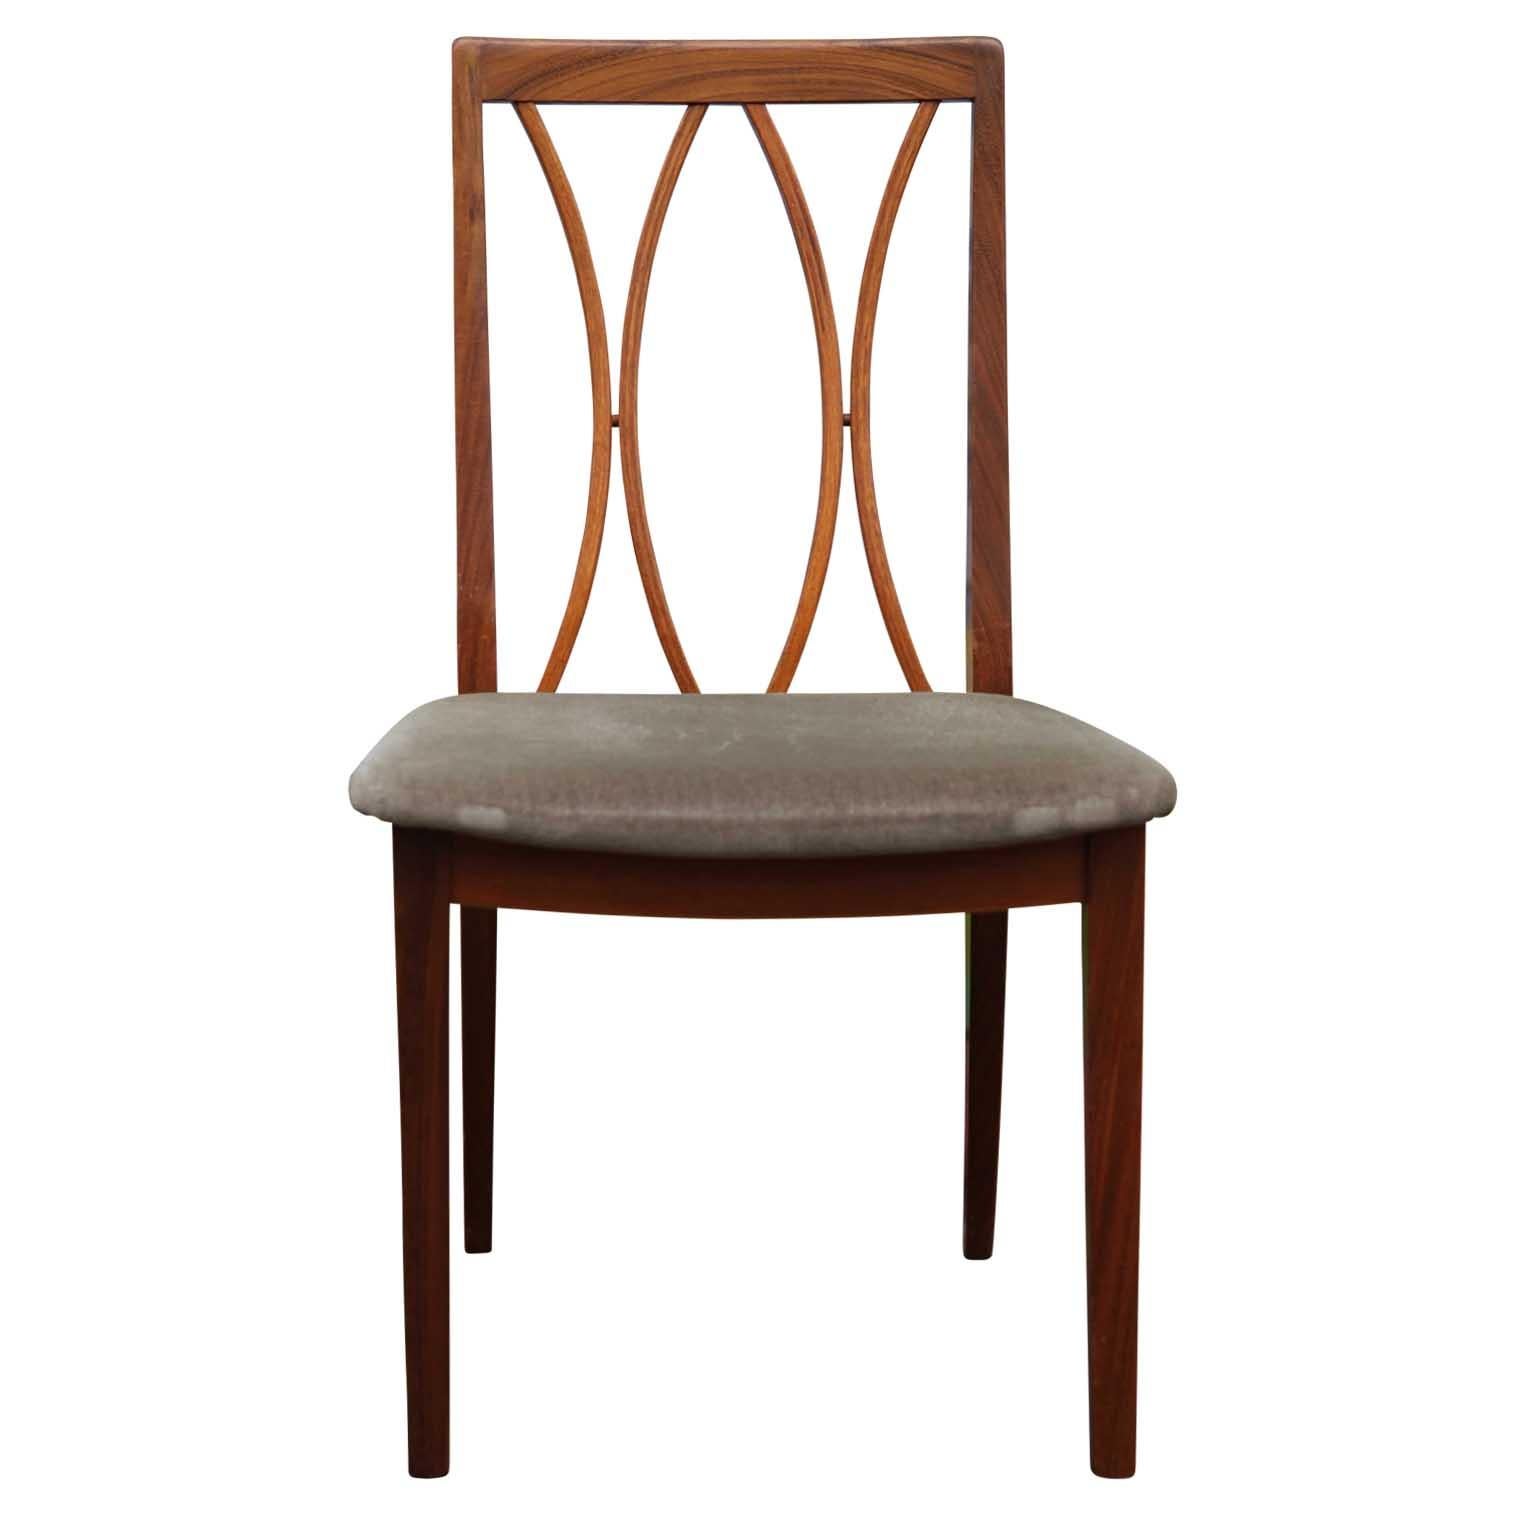 Set of 8 curve back dining chairs made by E. Gomme for G-Plan in the mid-late 20th century. The chairs are made out of afrormosia wood and have an upholstered seat. Reupholstery recommended.